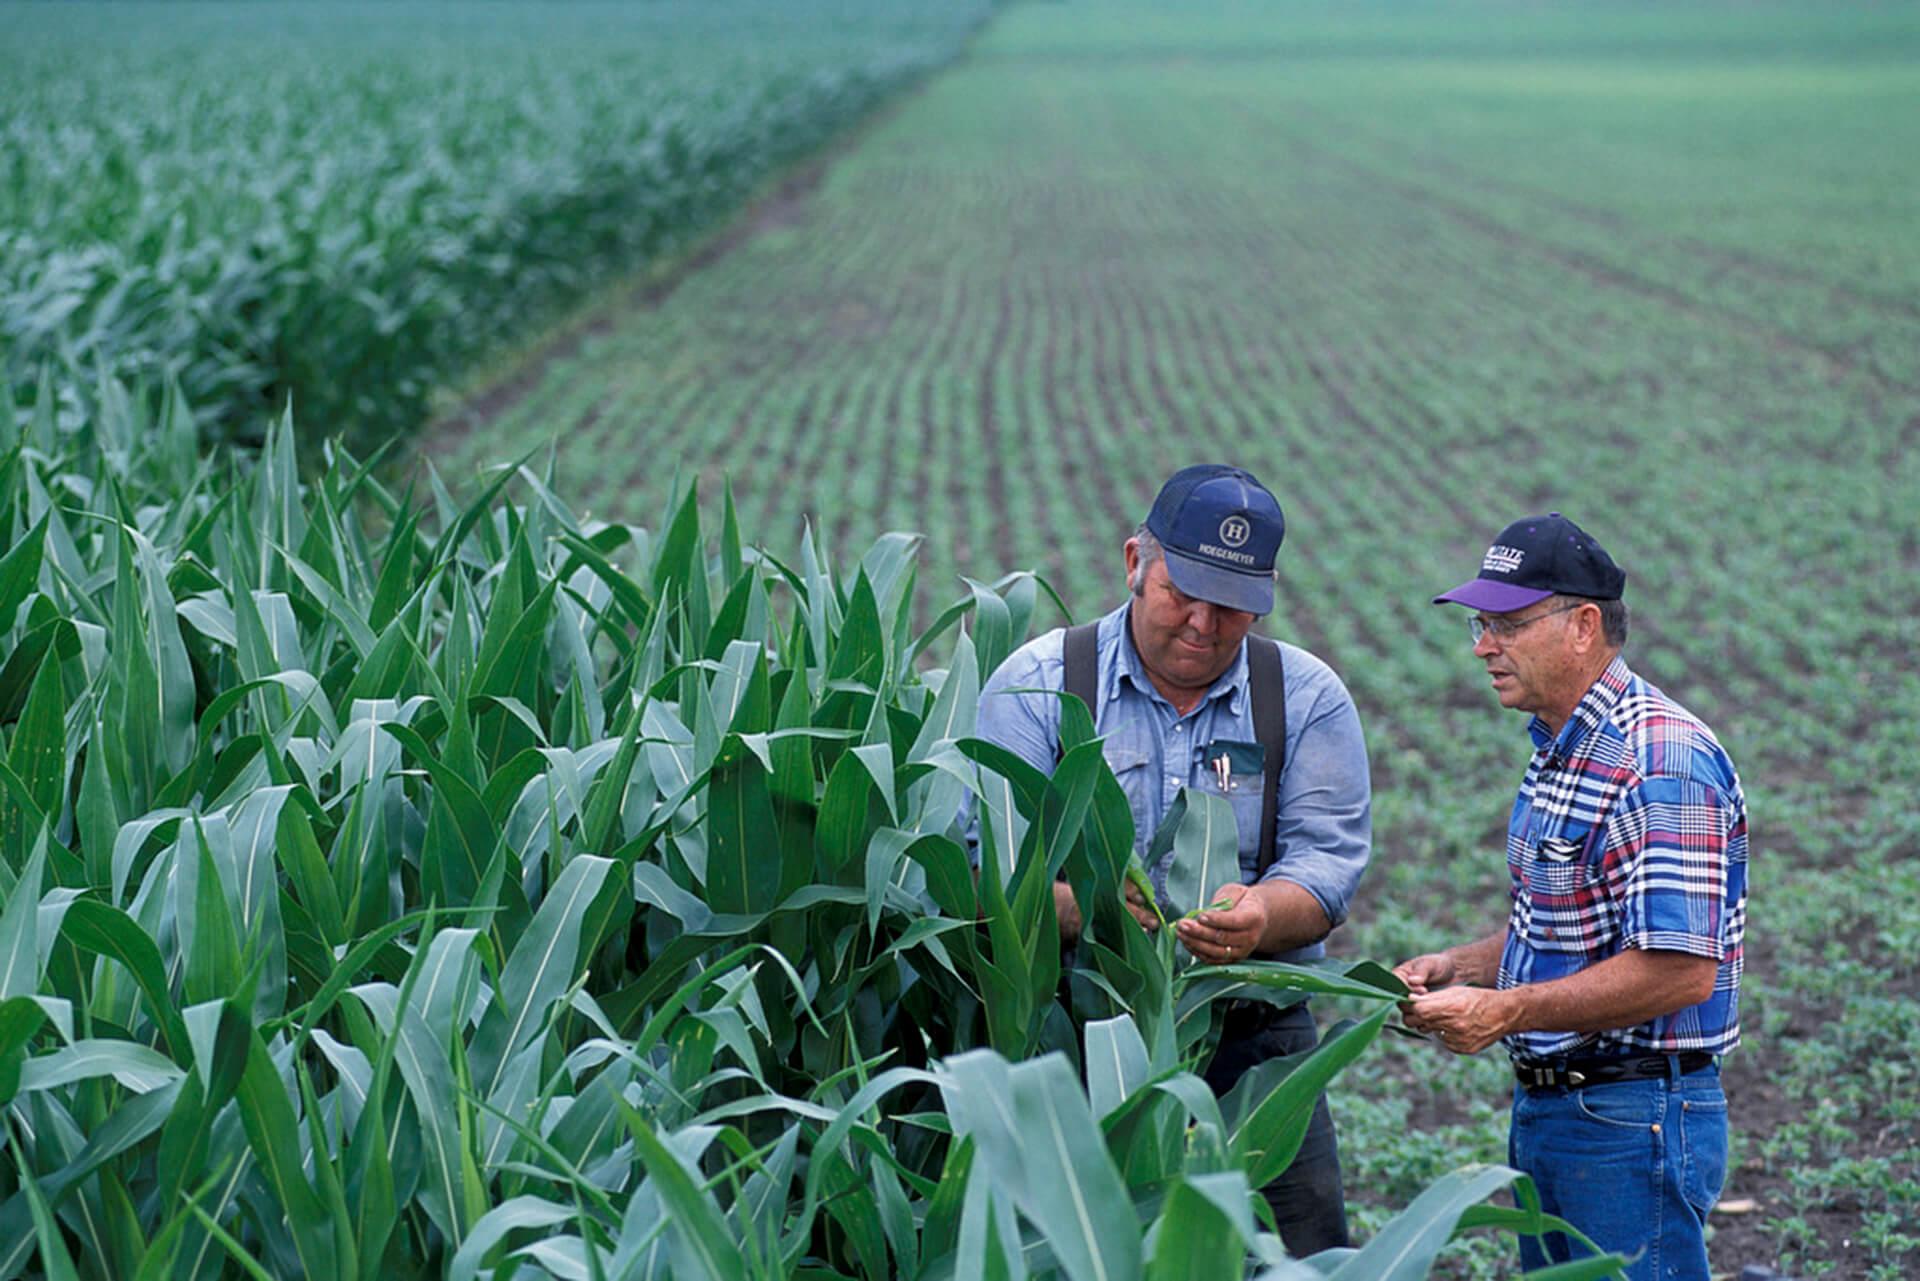 Two extension agents examine corn crop in the field